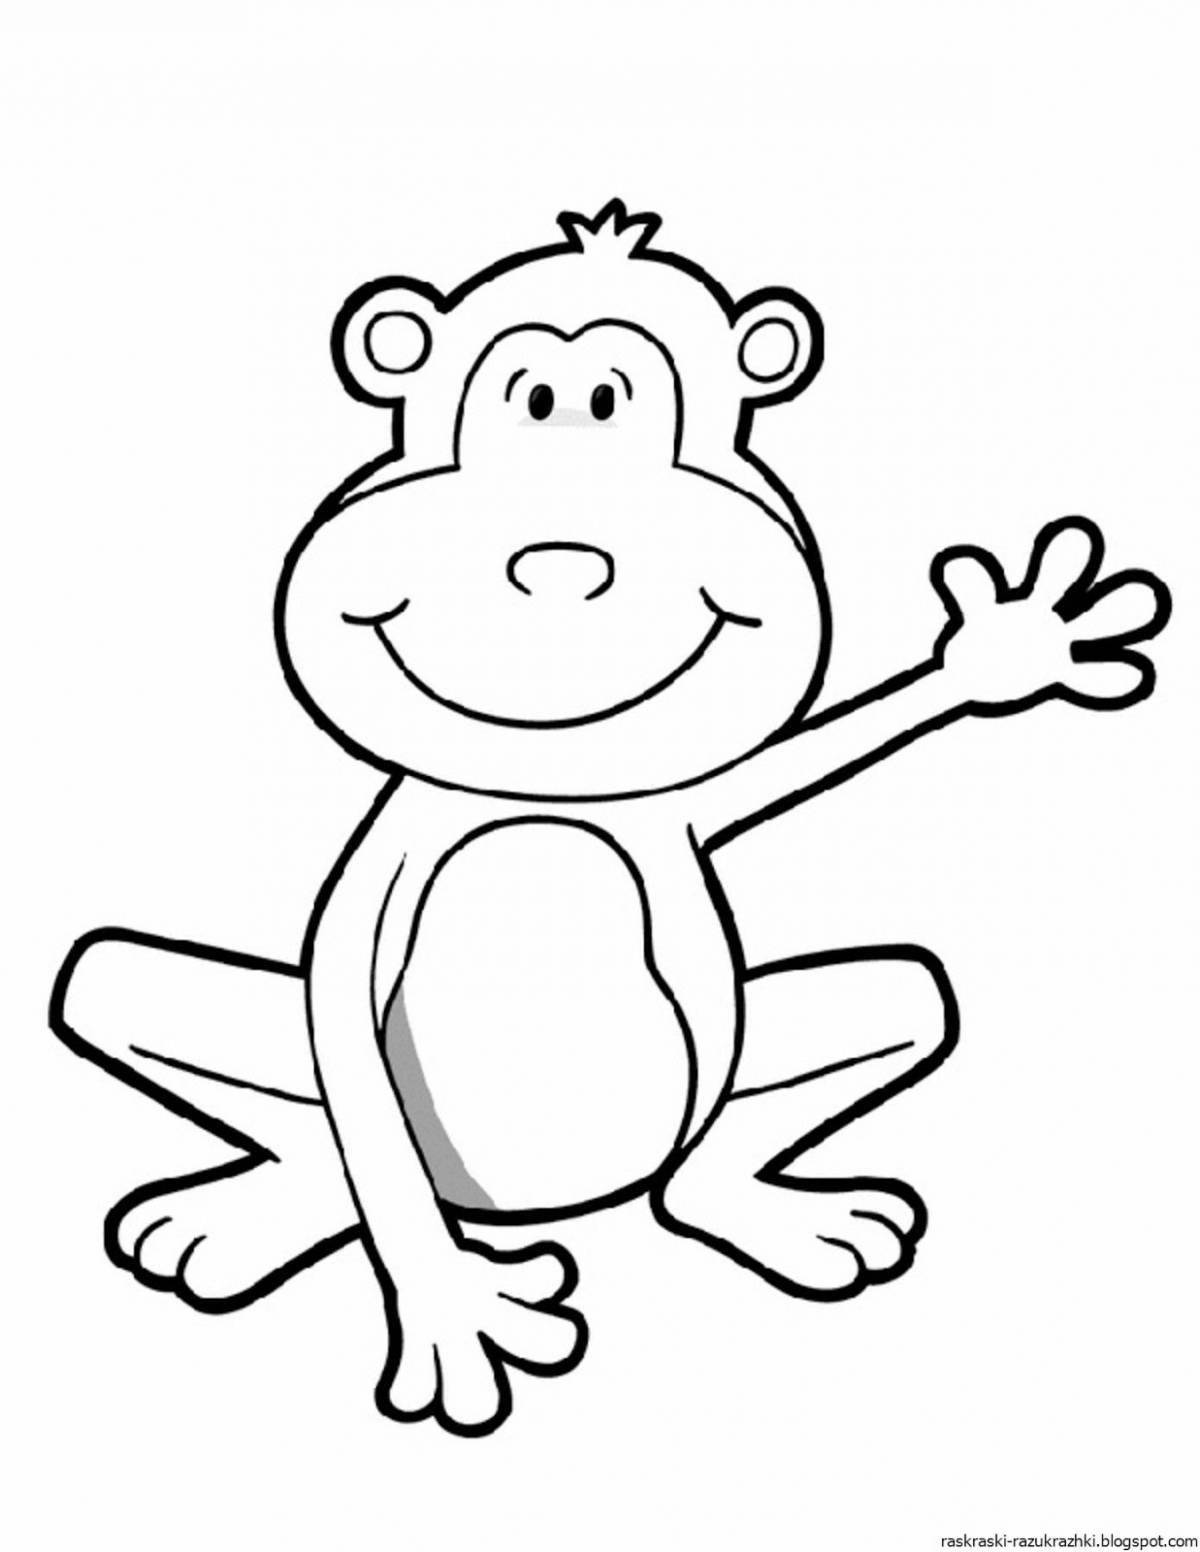 Fun monkey coloring book for kids